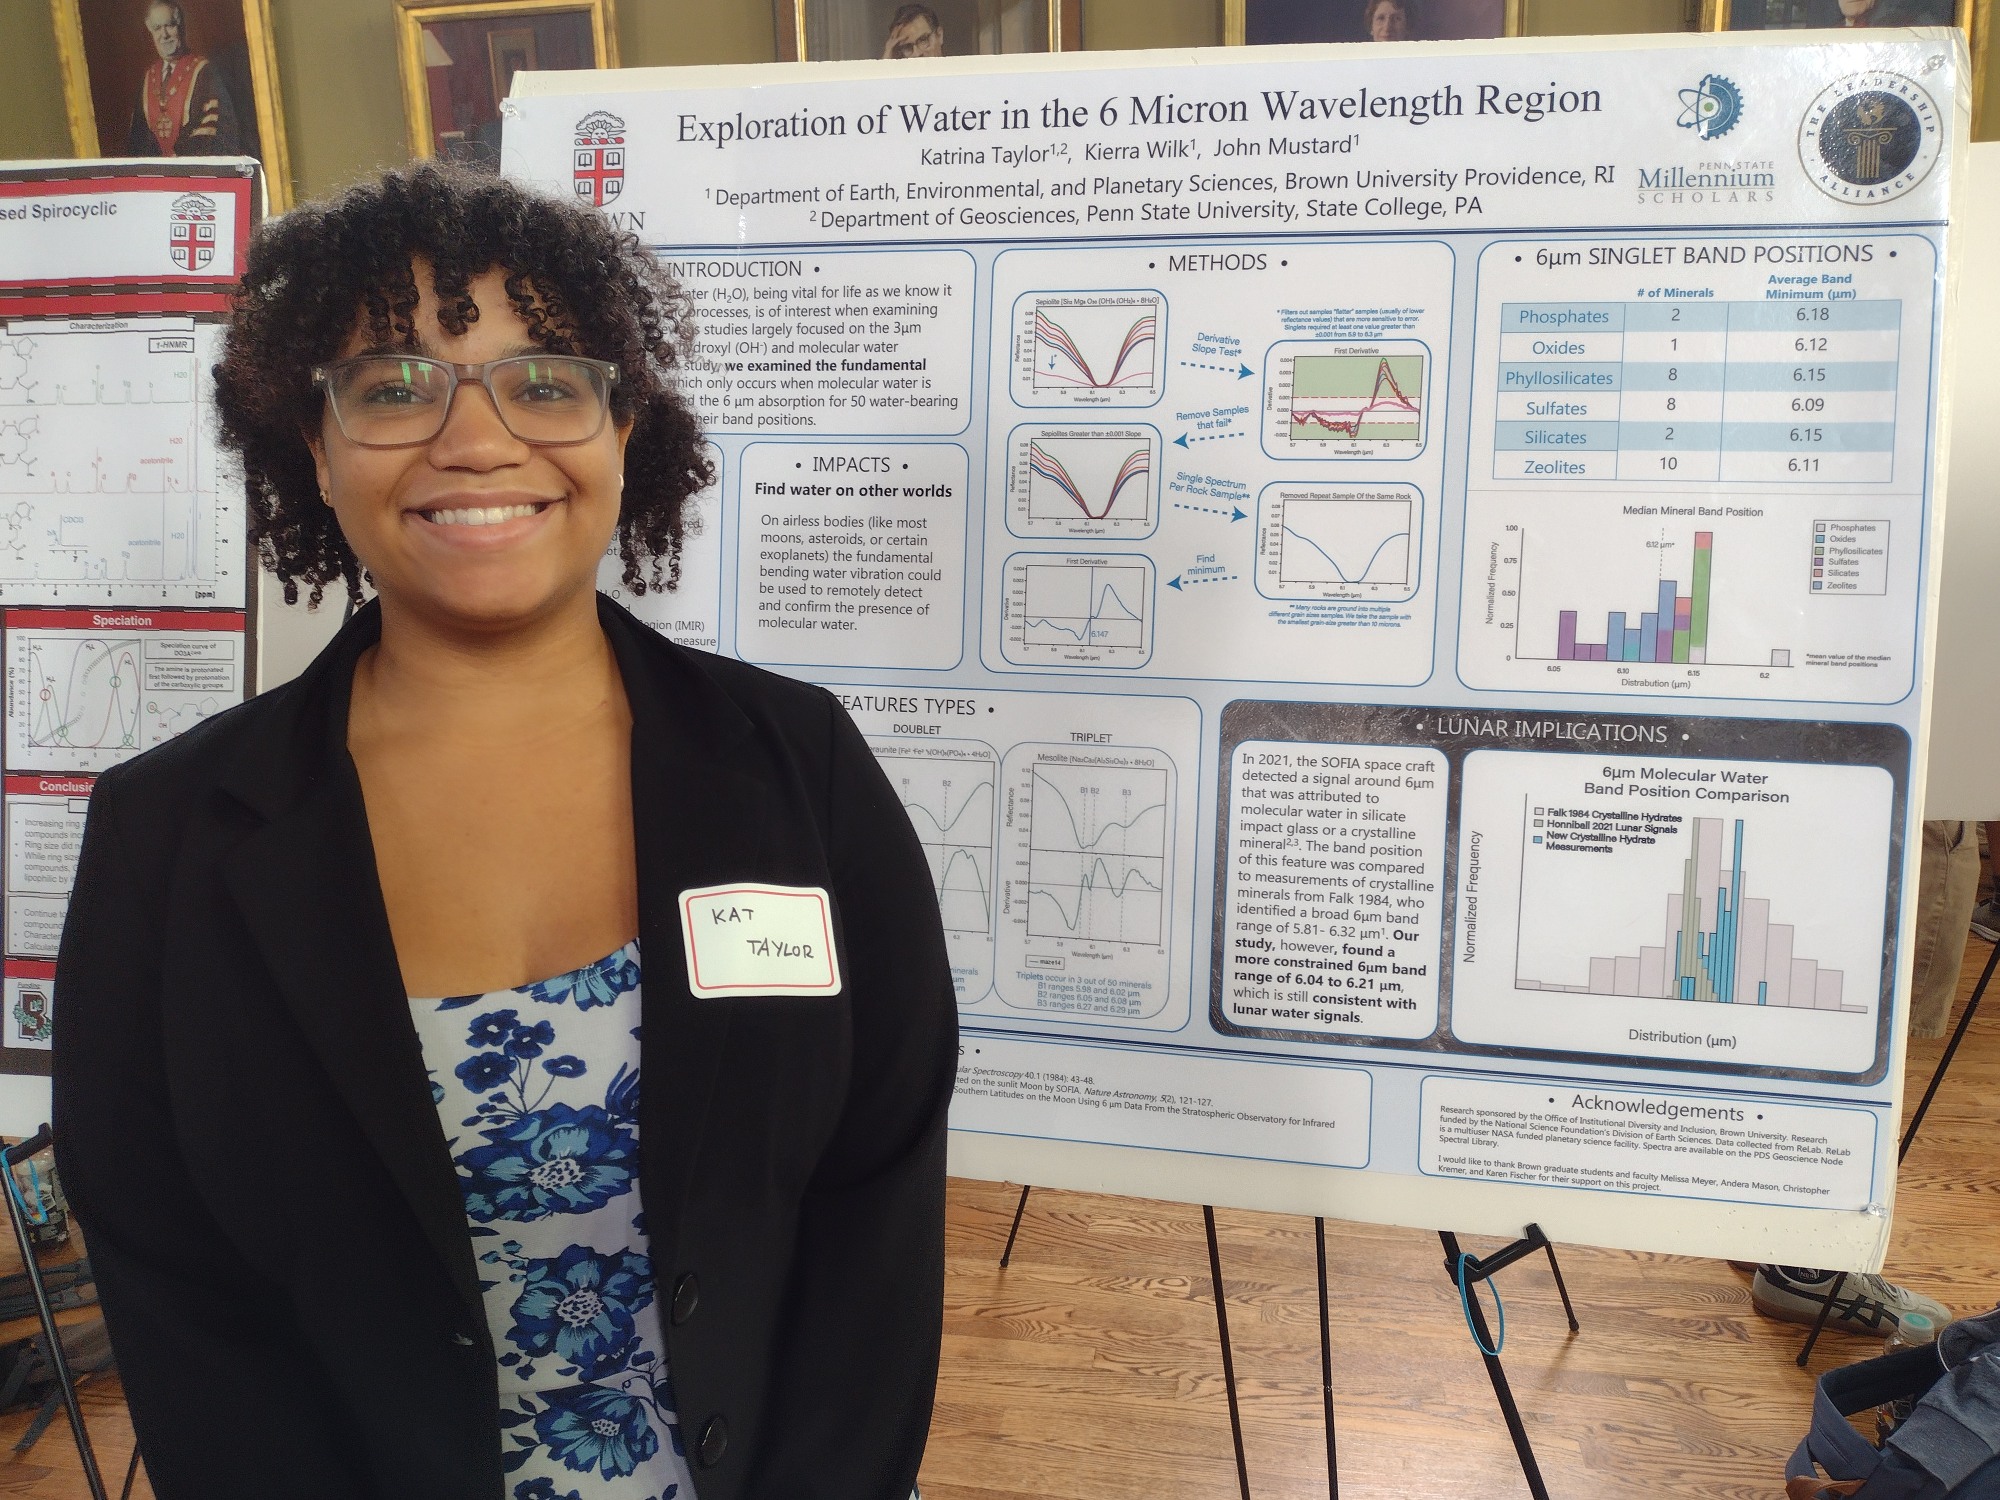 Katrina poses with her research poster.